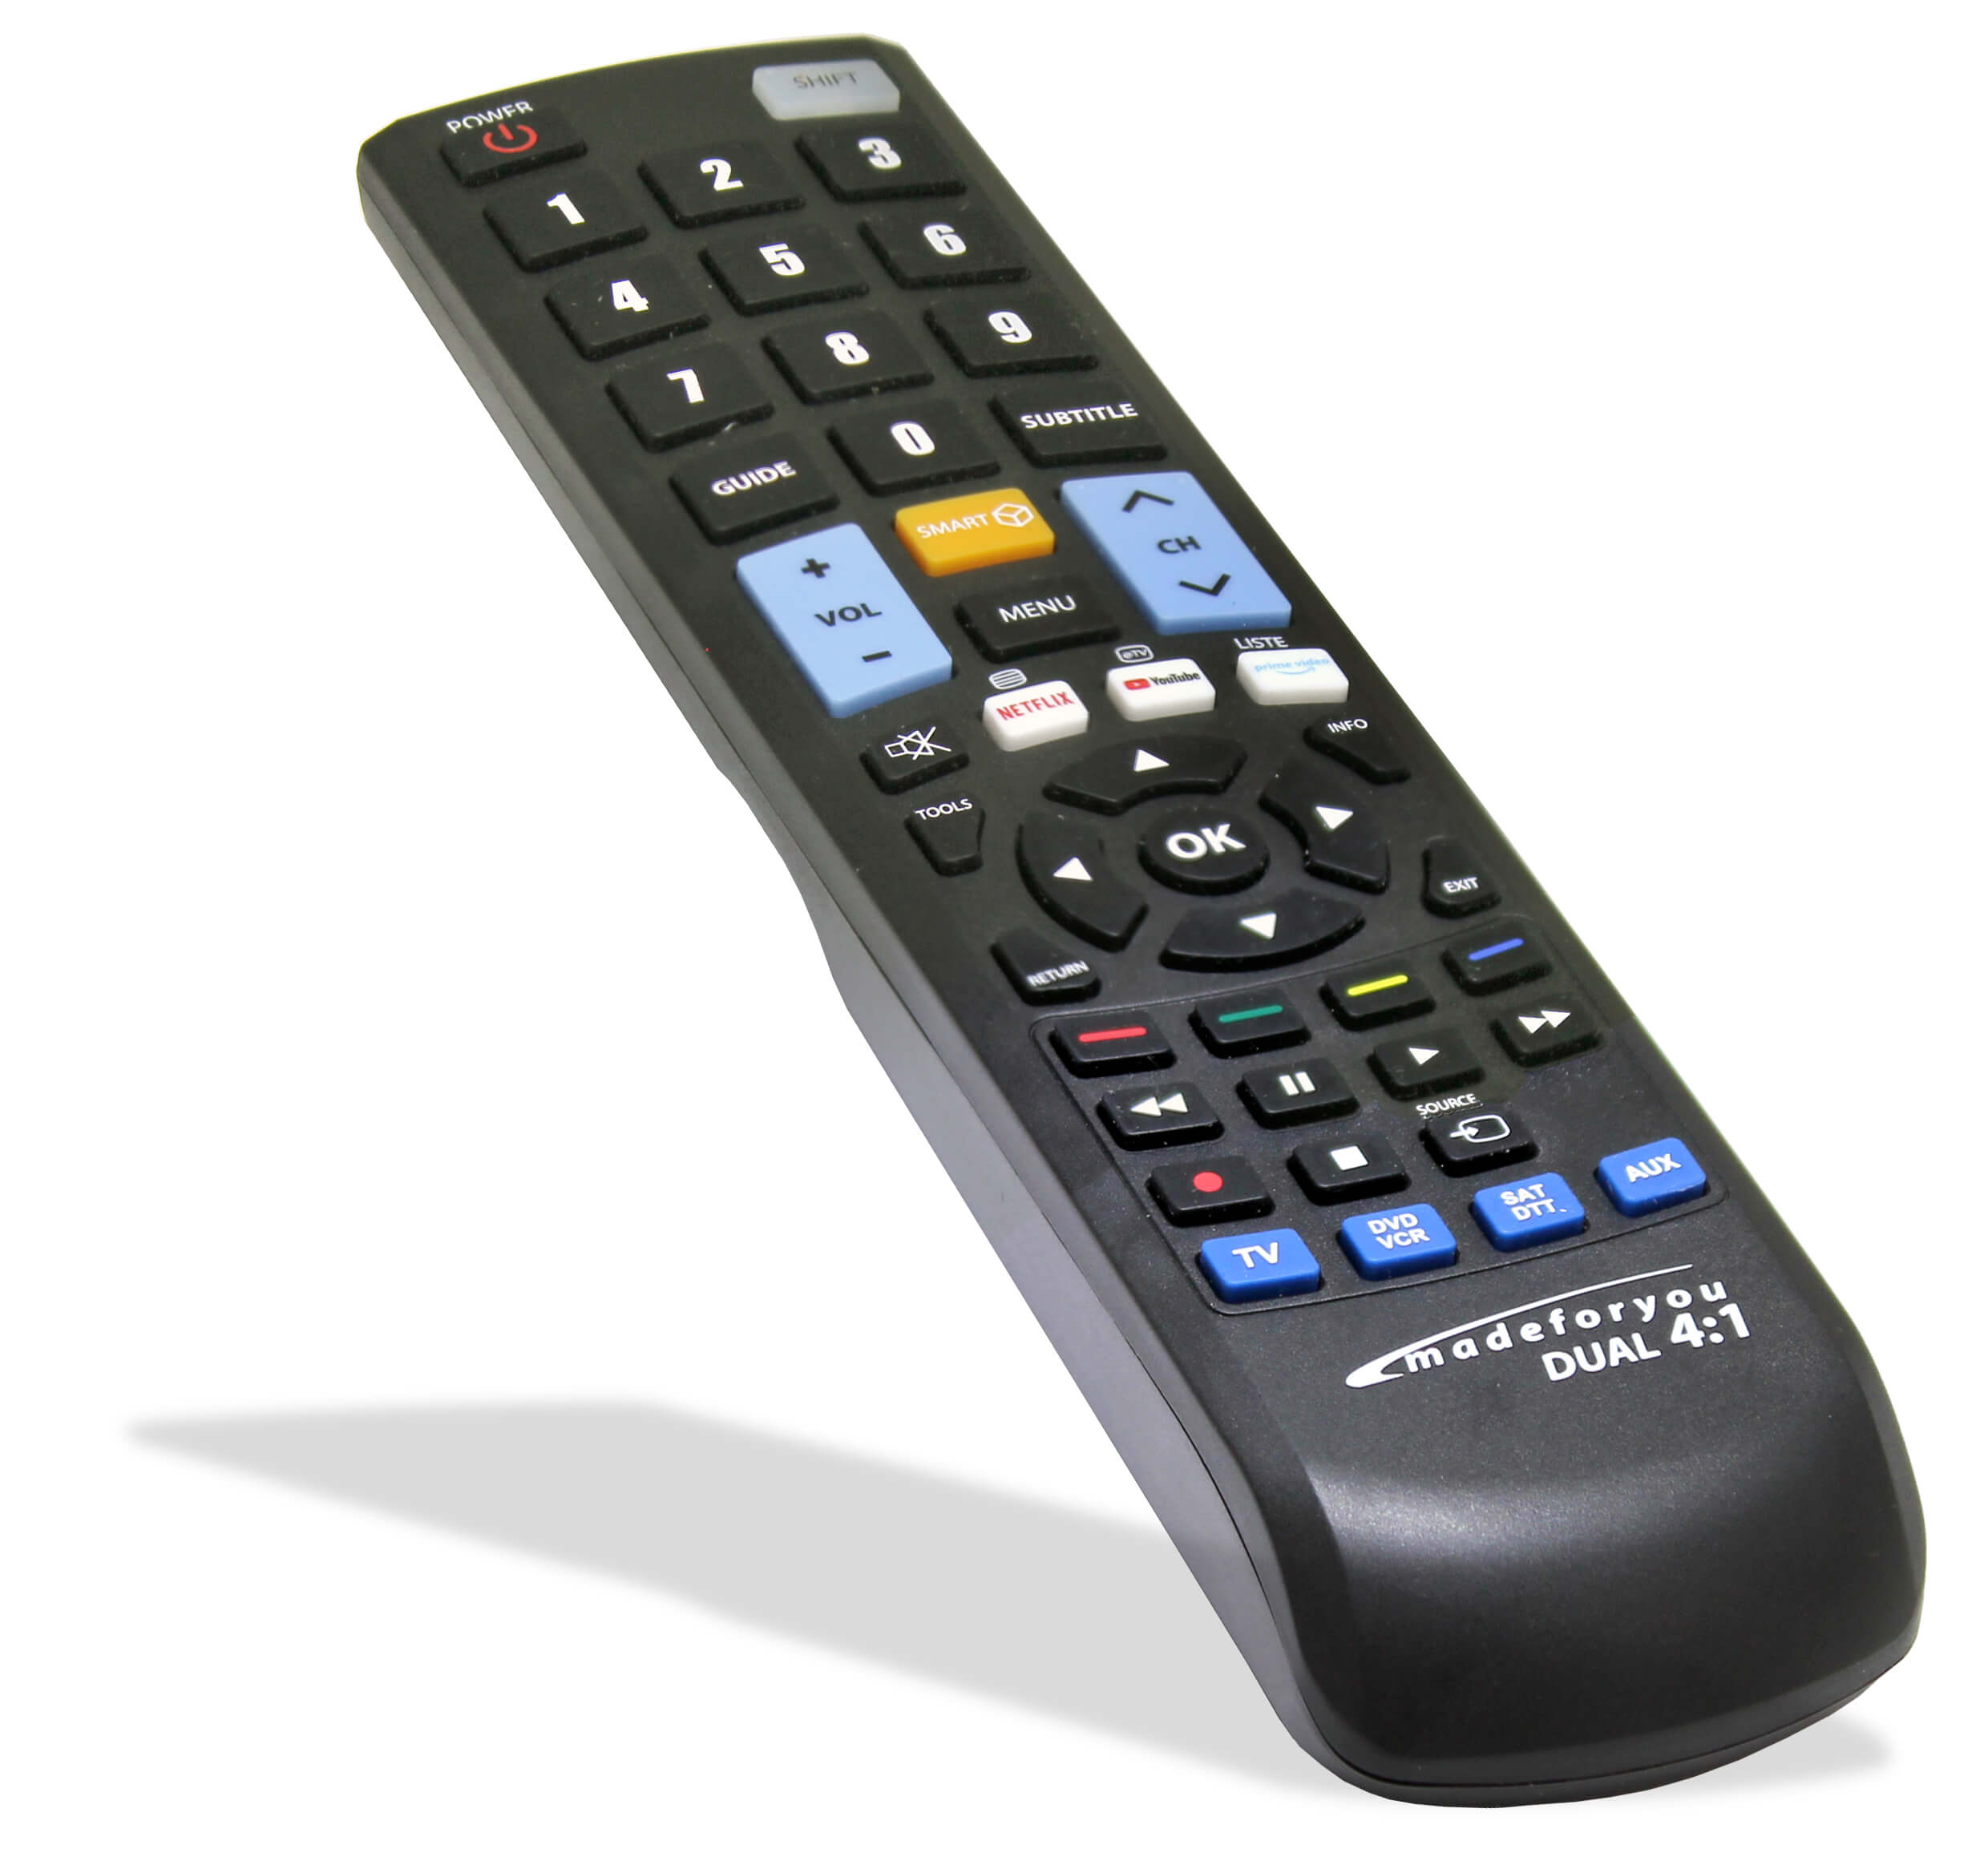 JL3084 Made for you 4:1 Black Programmable Universal Remote Control